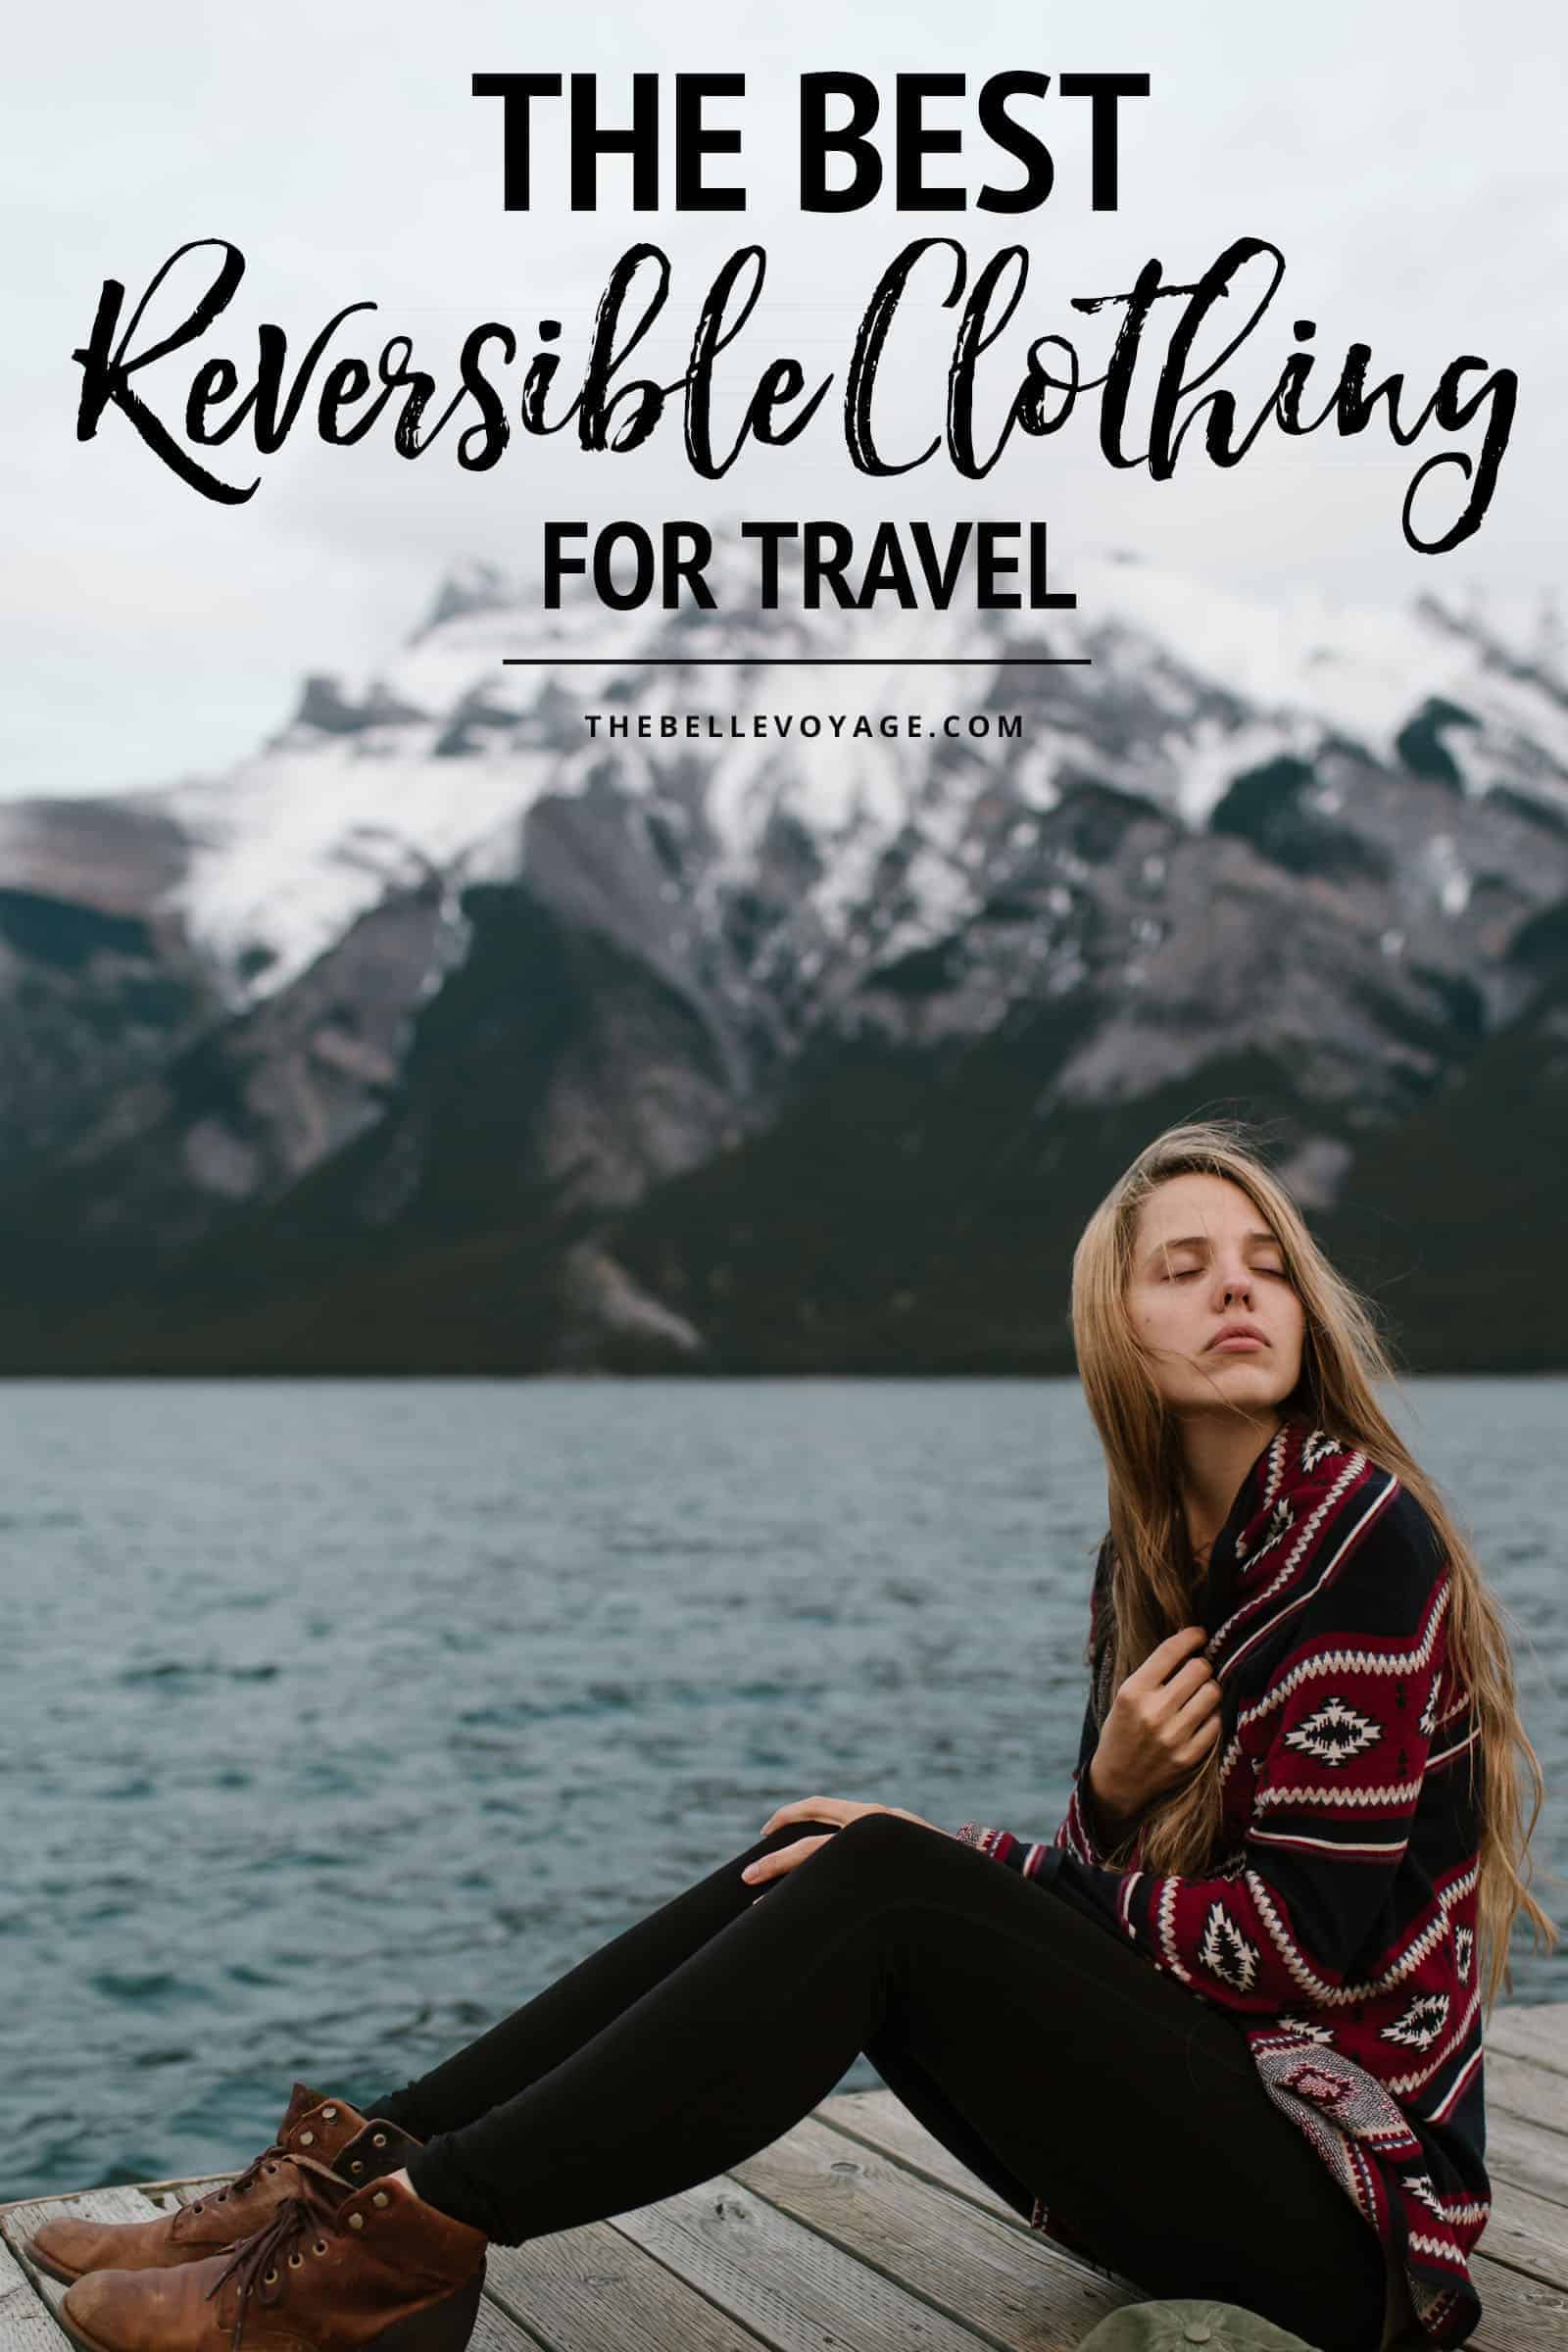 Reversible Clothing for Travel - 7 Versatile Pieces to Pack